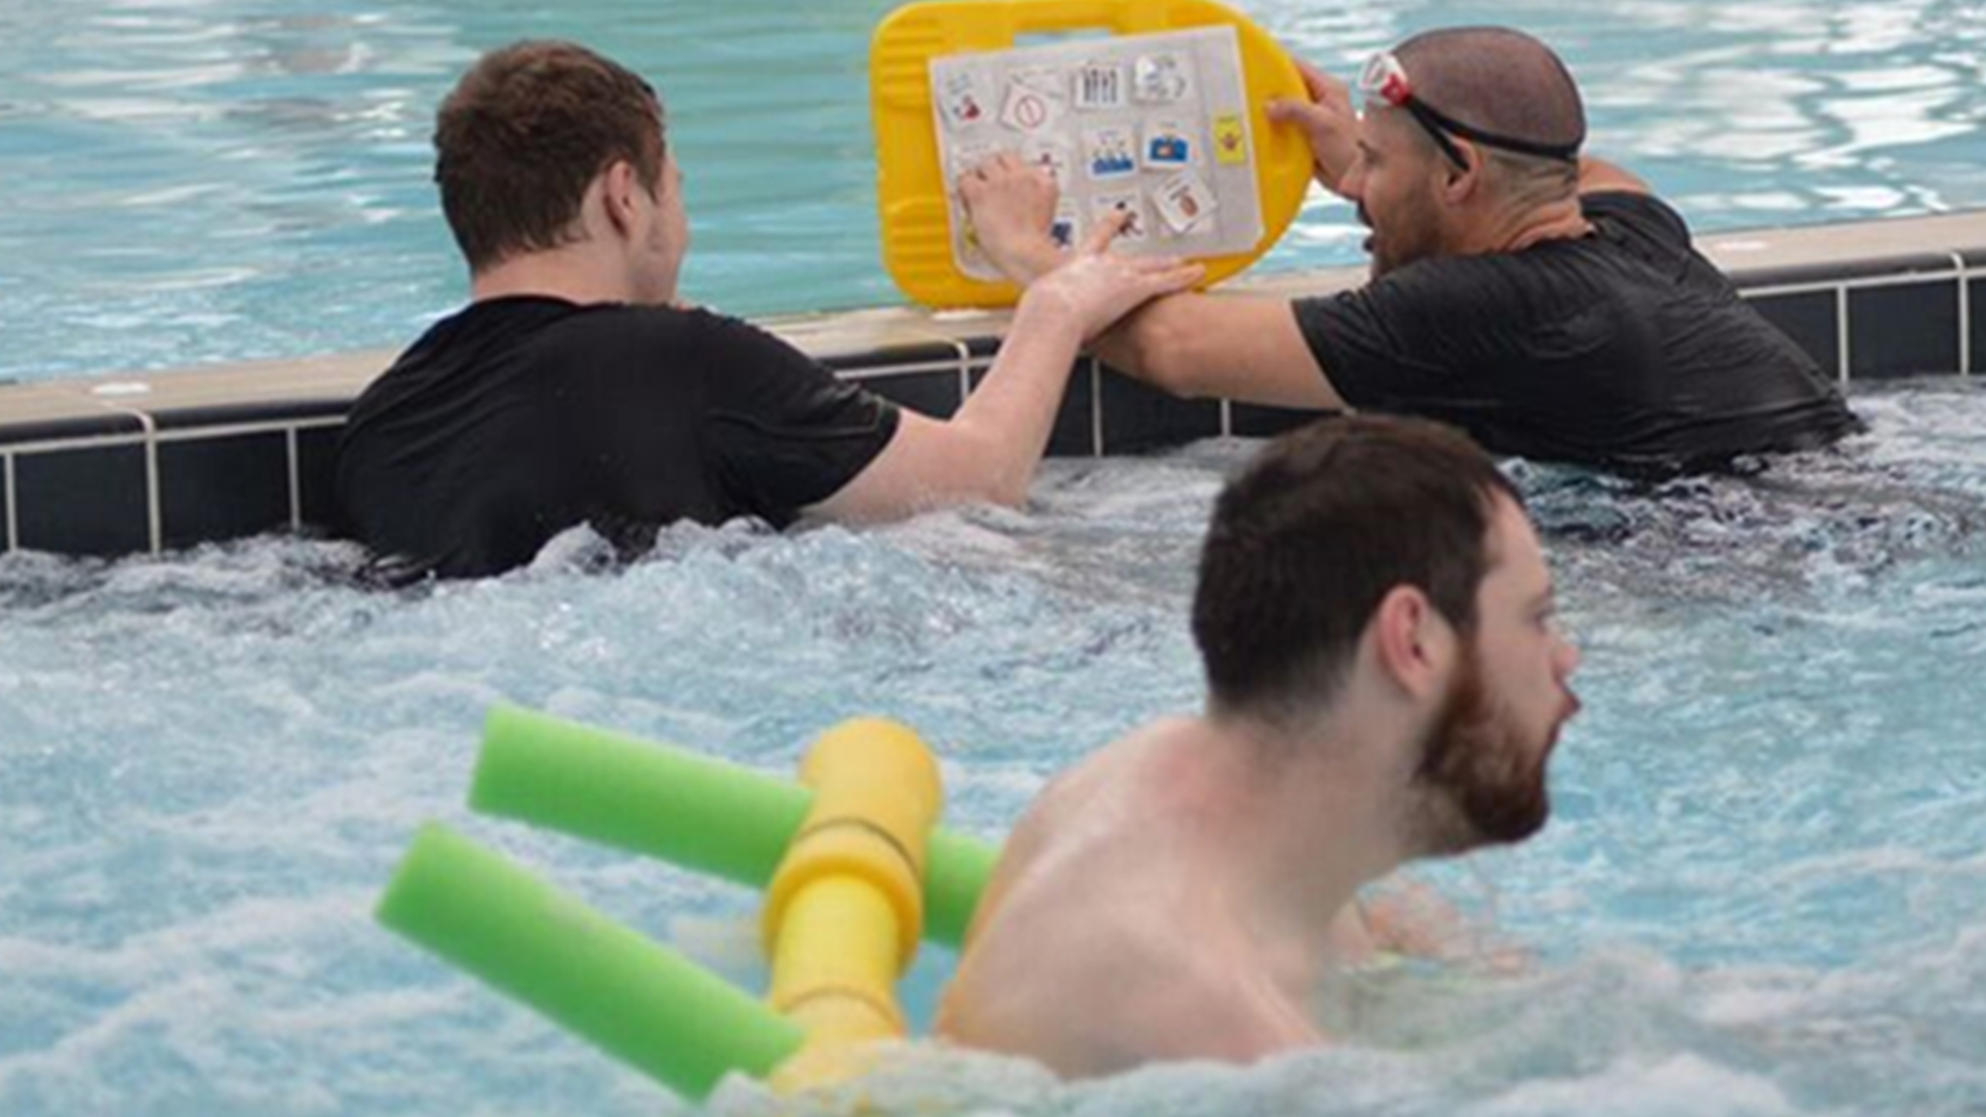 Three men enjoying some leisure time in the pool. Two of them are chatting using a communication display stuck on a kick board.